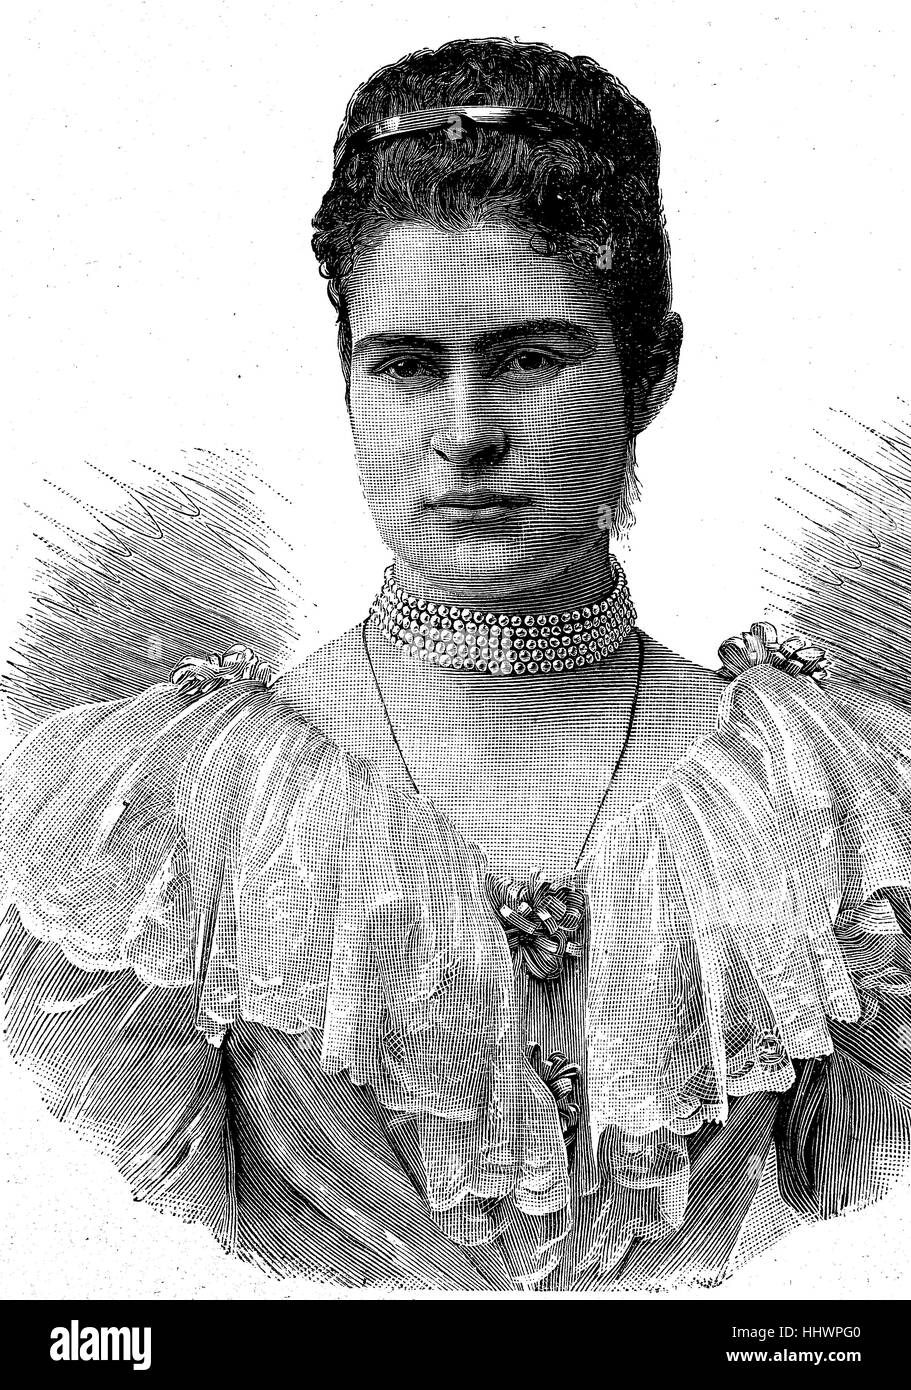 Maria Isabella of Wuerttemberg, Princess of Saxony, August 30, 1871 - May 24, 1904, Germany, daughter of Philipp, Duke of Wurttemberg, and Marie of Hapsburg-Teschen, wife of Johann Georg, Duke of Saxony, historical image or illustration, published 1890, digital improved Stock Photo